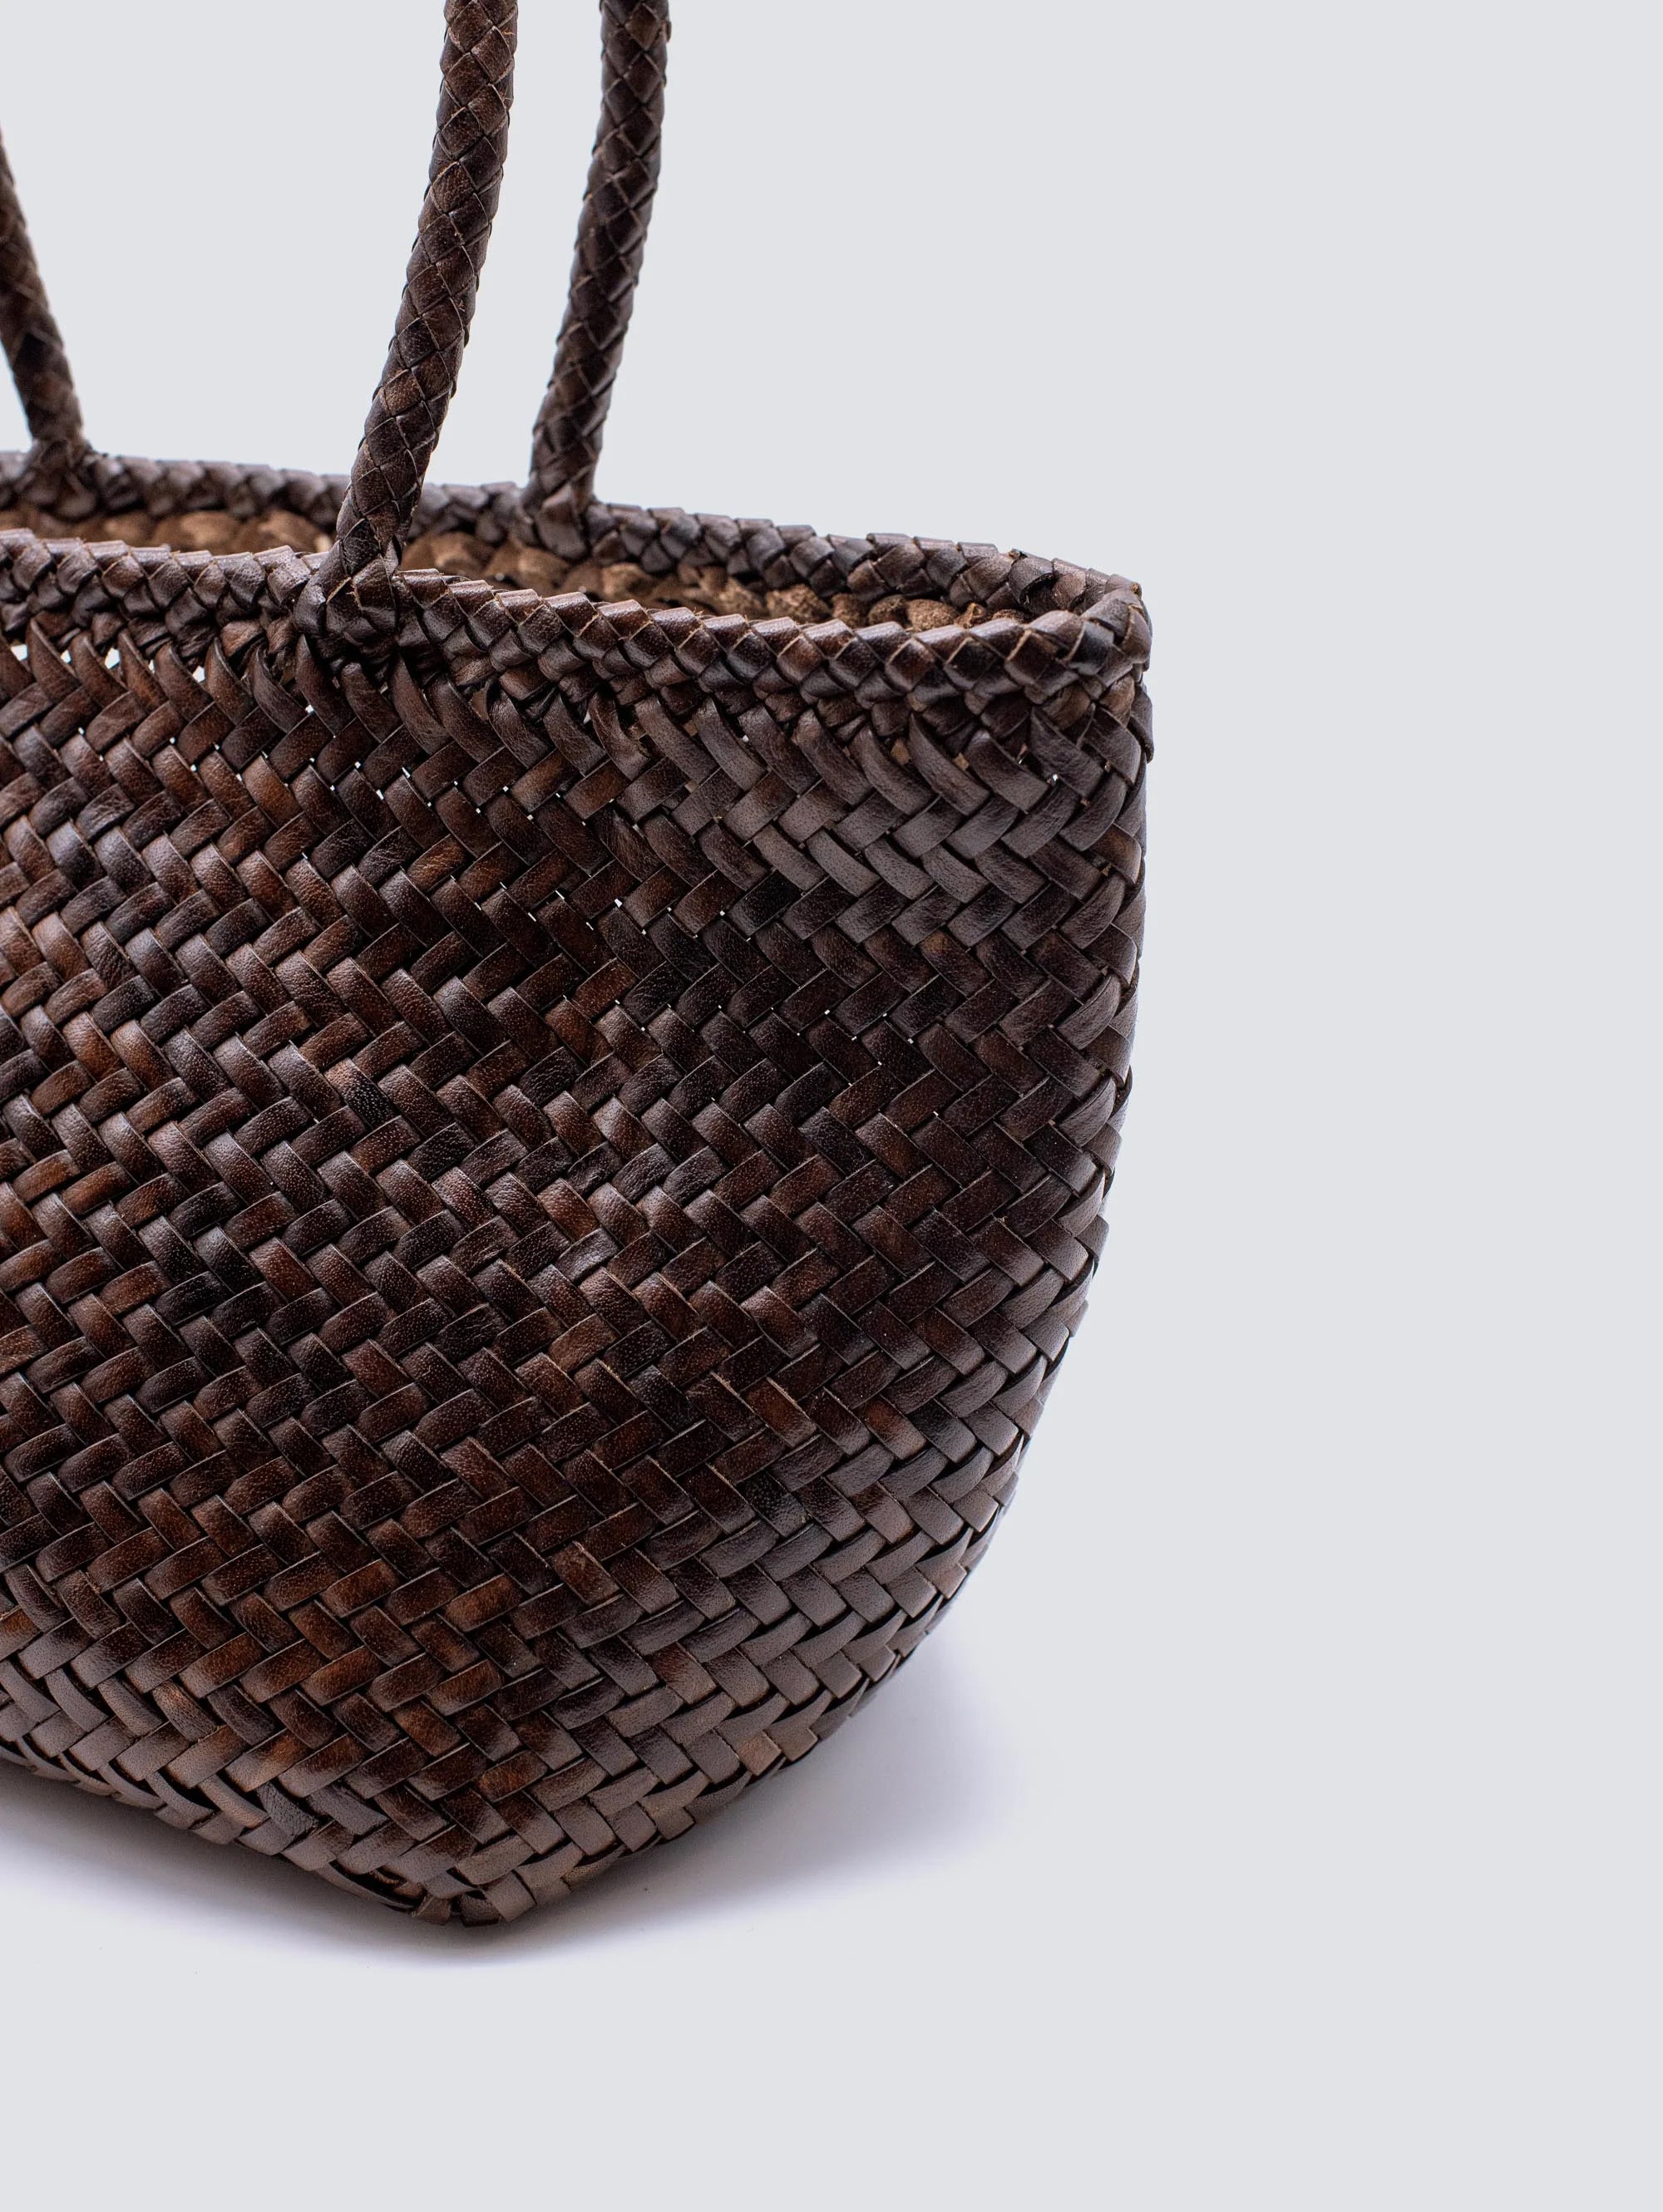 Grace Basket Small Brown Woven Leather Bag